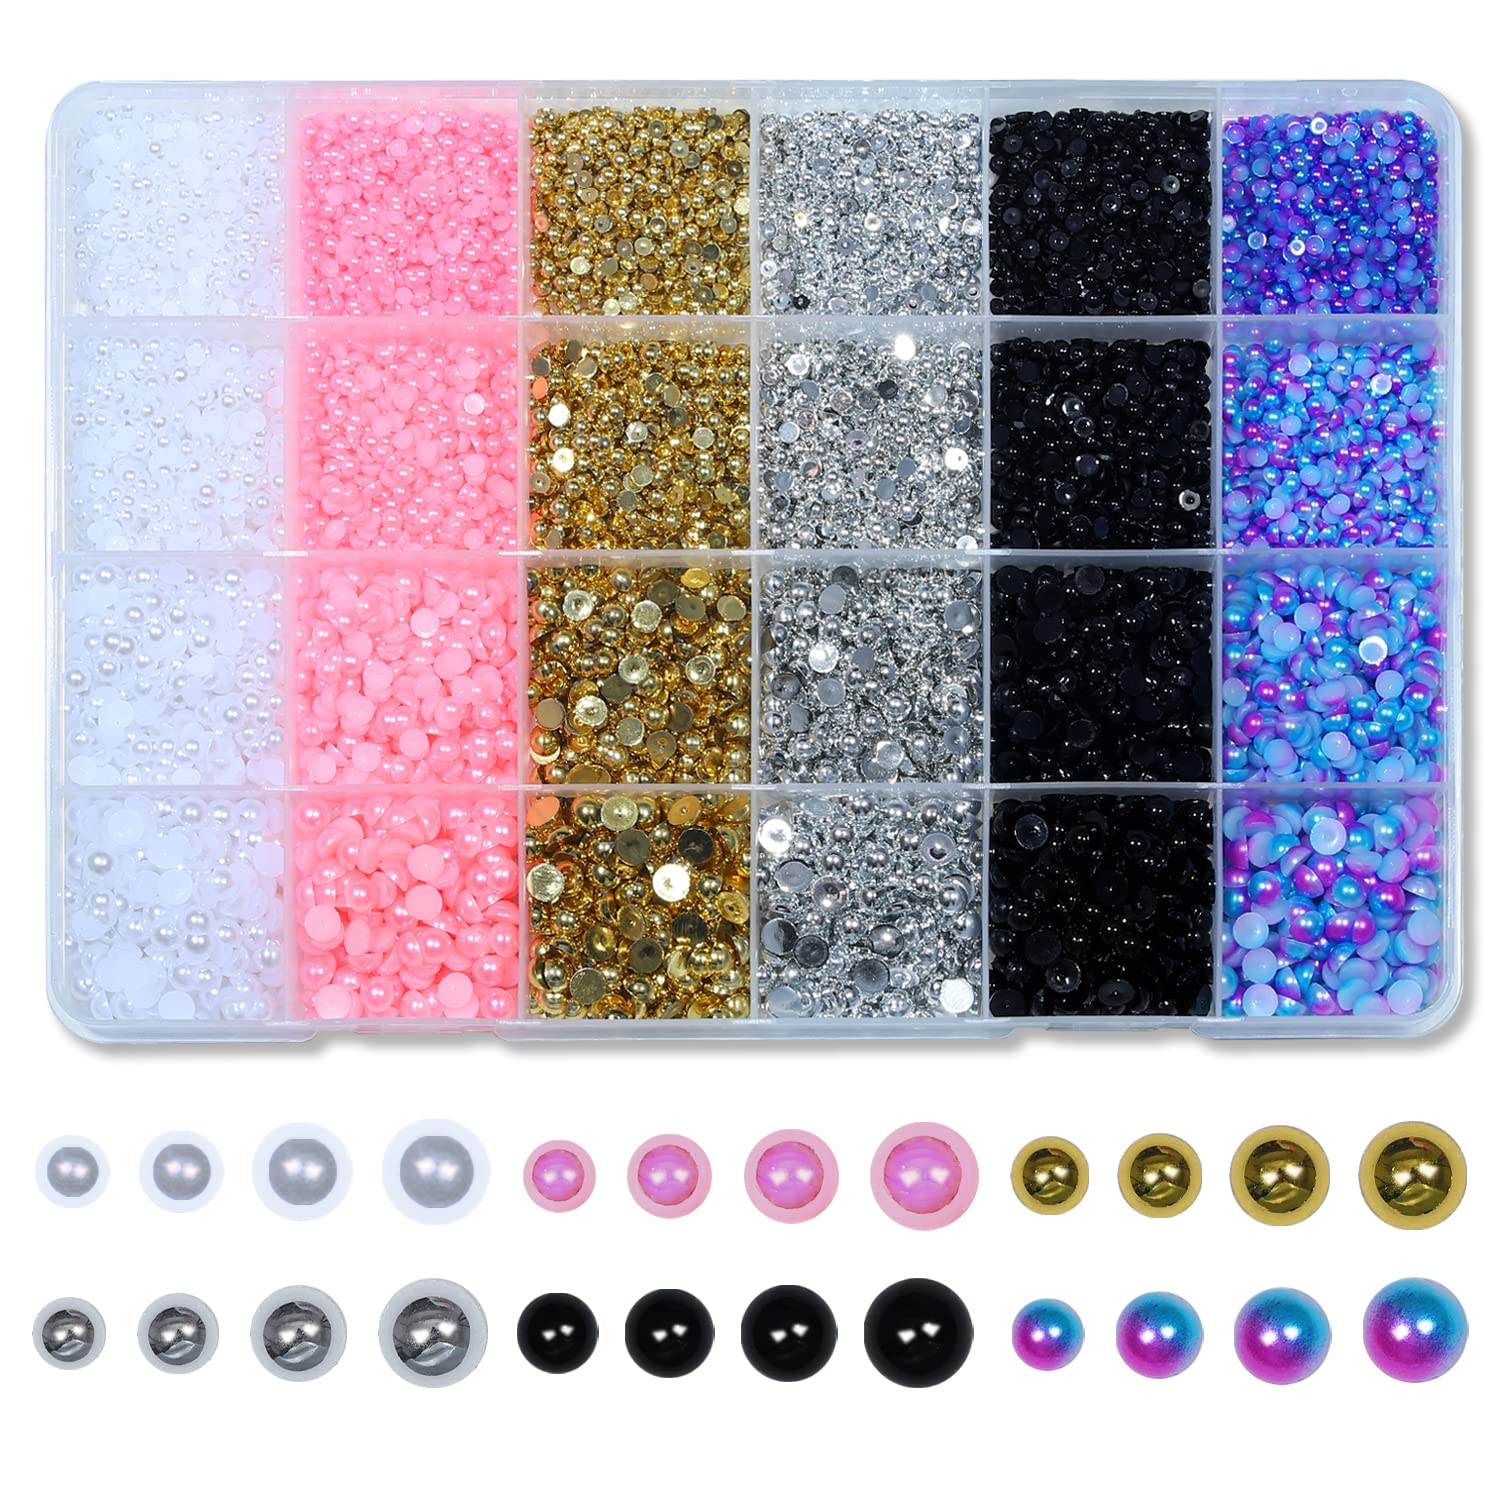 6 Colors ABS Half Pearls for Crafts, 11000Pcs Flatback Nails Pearls Bead Flat  Back Pearls Gems for Nail Art Makeup, Shoes, DIY Craft Decorations 6 Color  Set